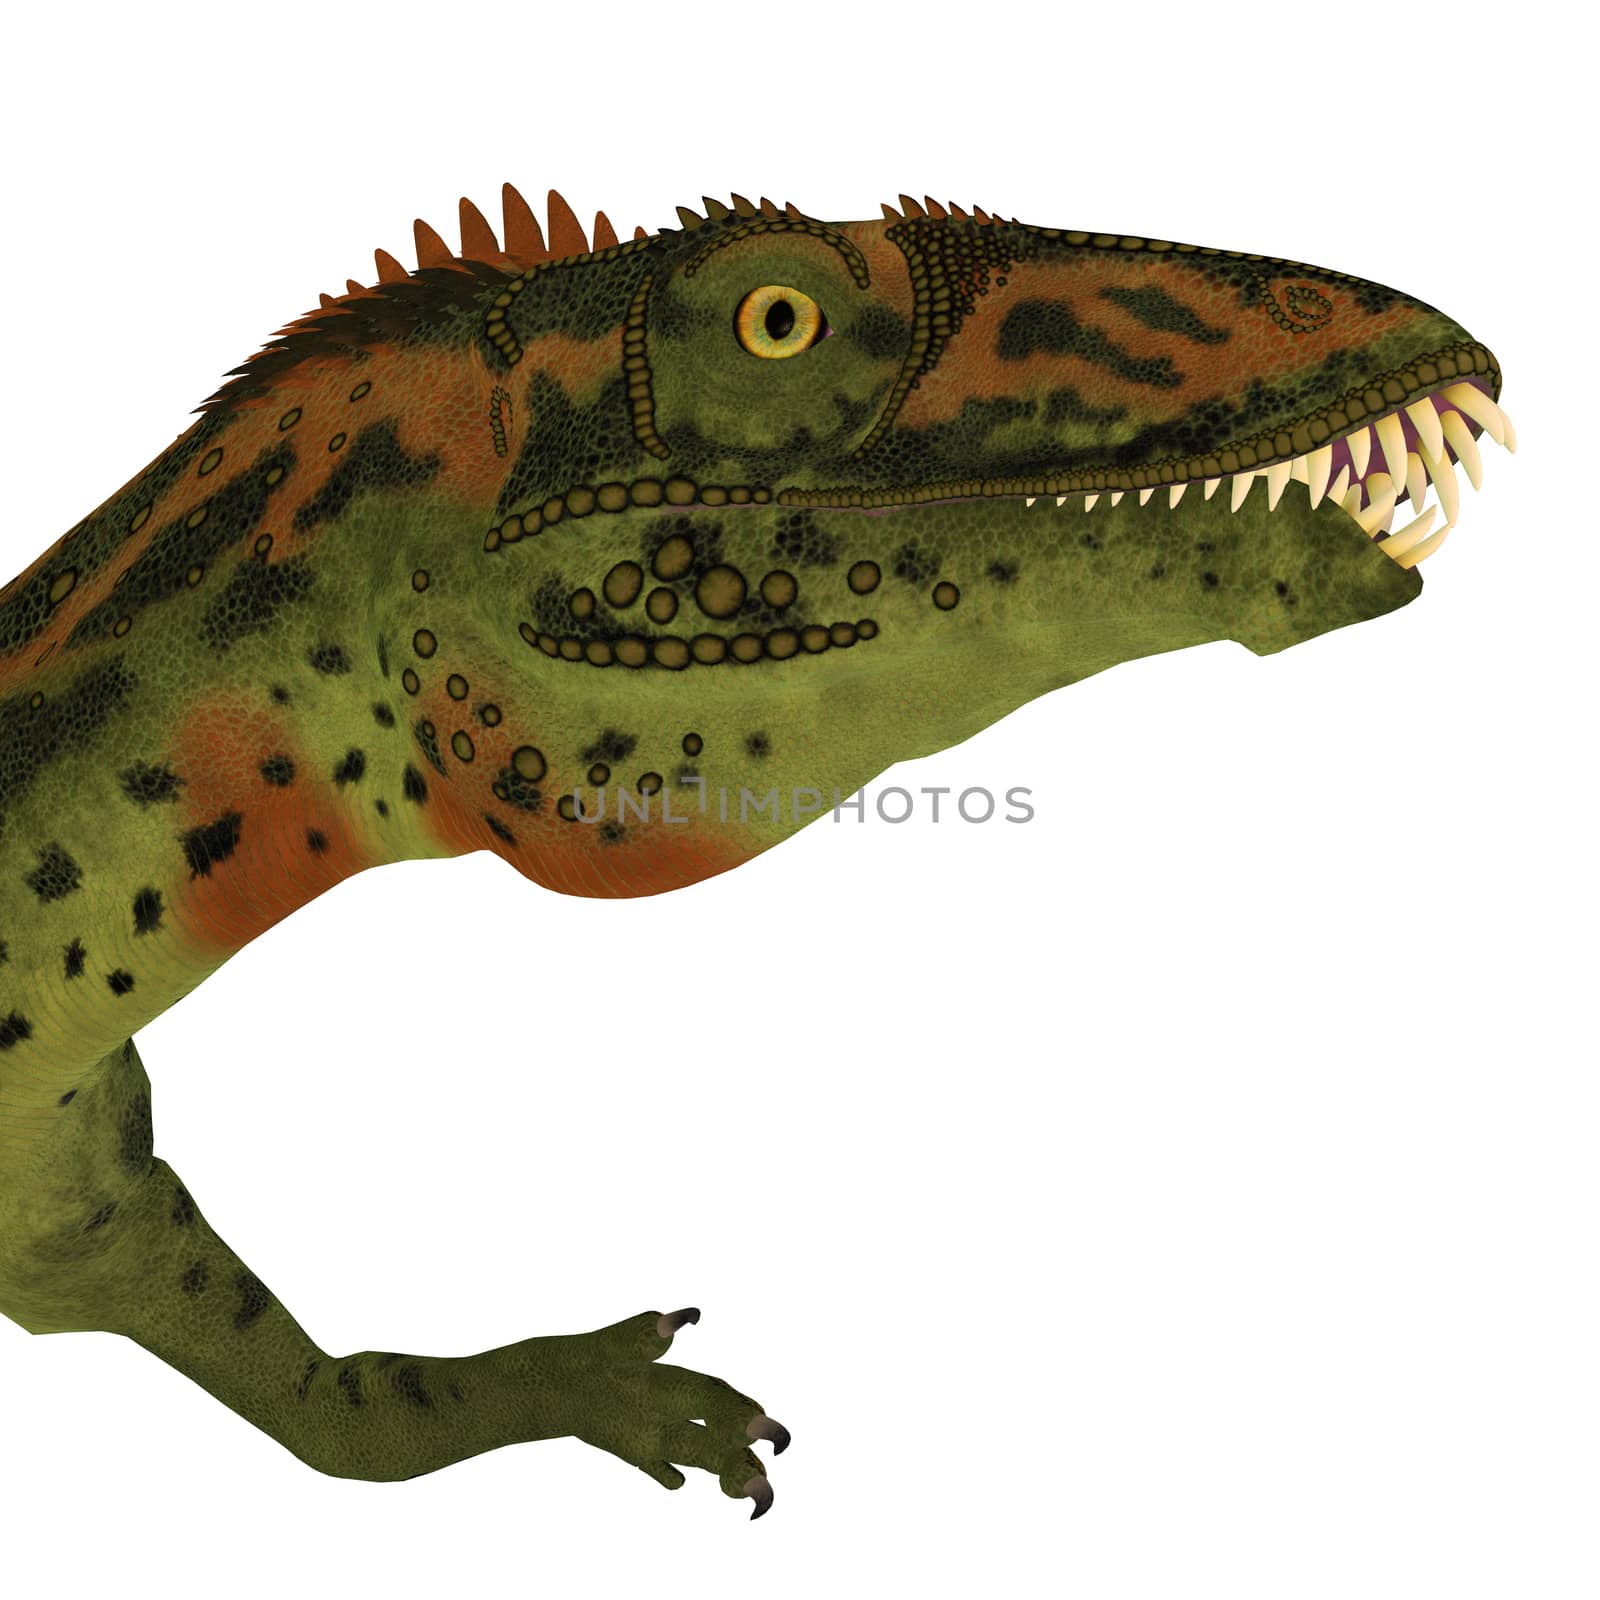 Masiakasaurus was a theropod dinosaur that lived in Madagascar during the Cretaceous period.